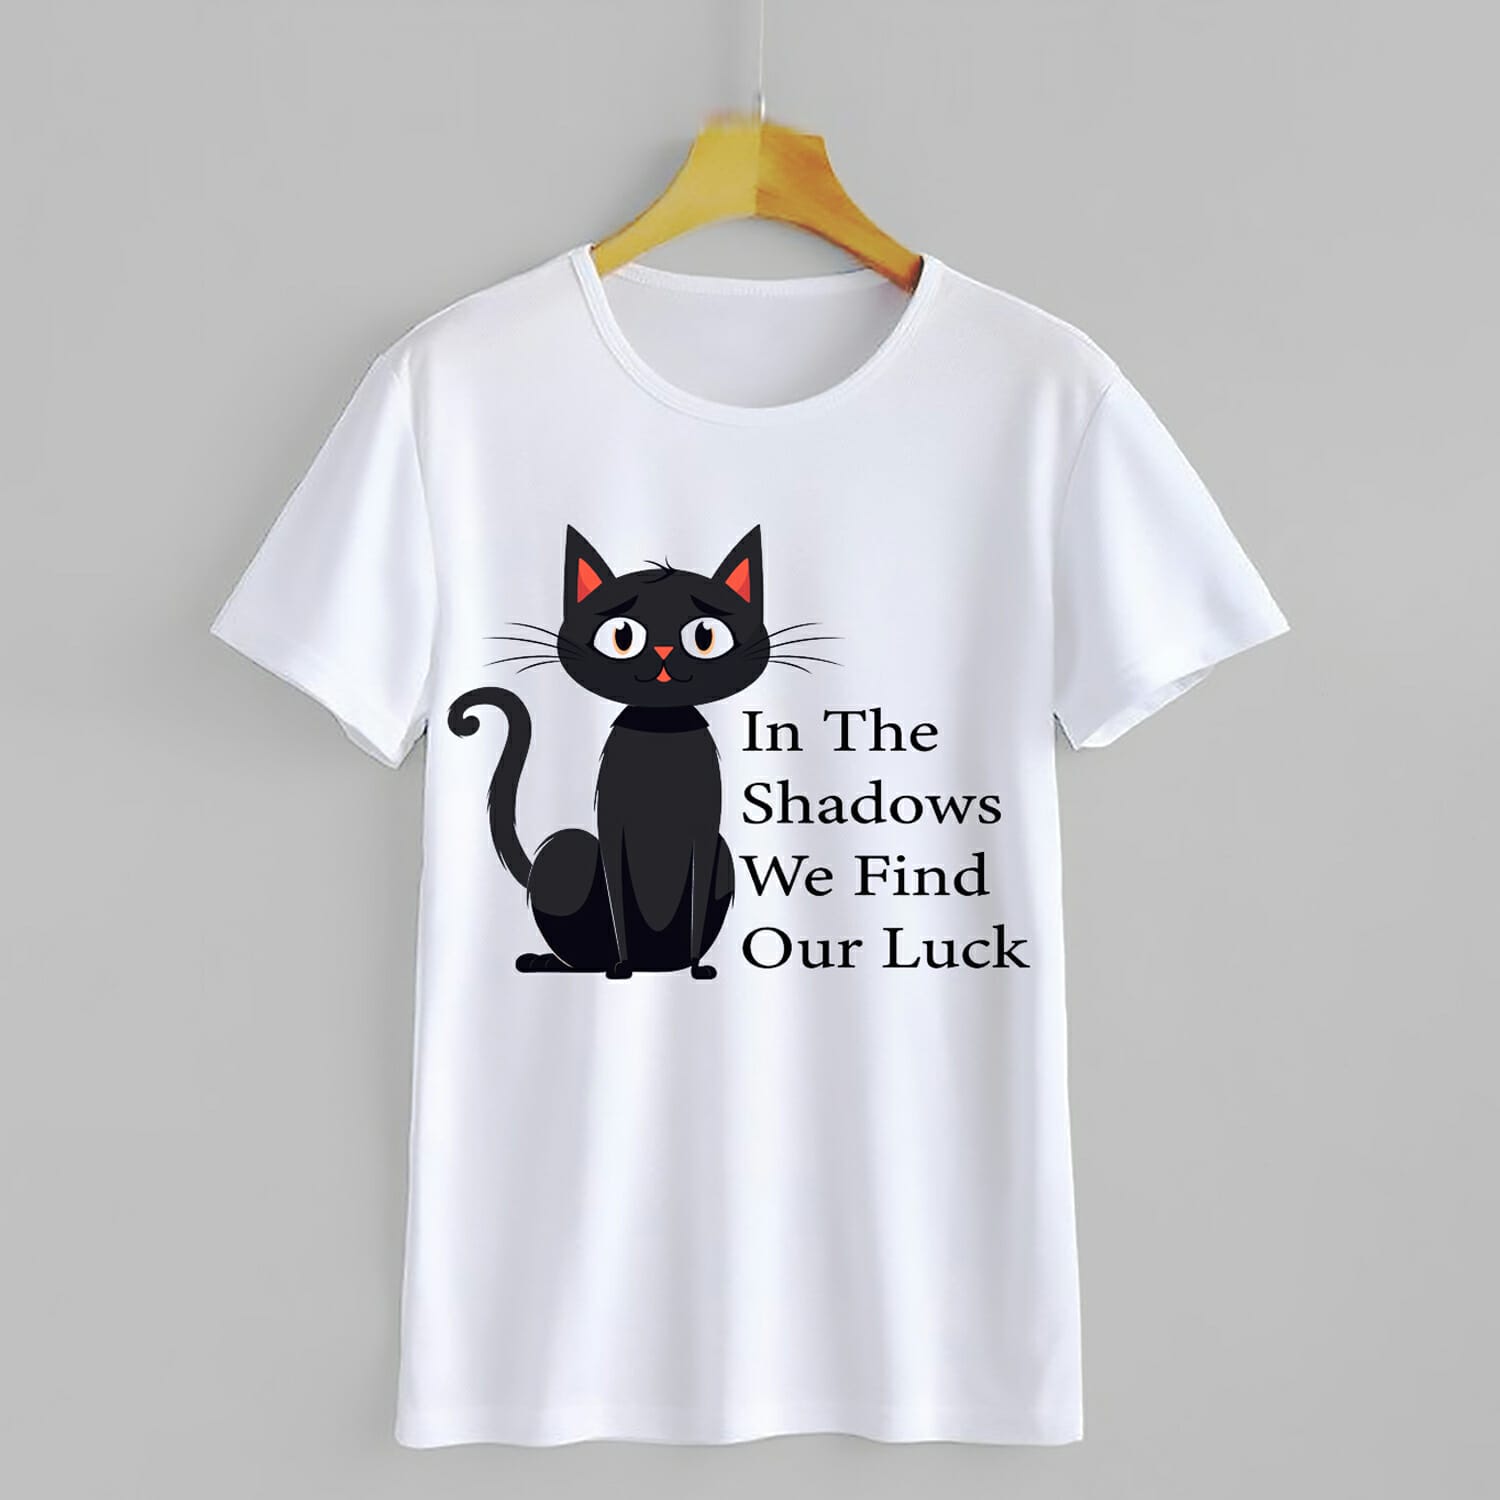 In The Shadows We Find Our Luck T-Shirt Design